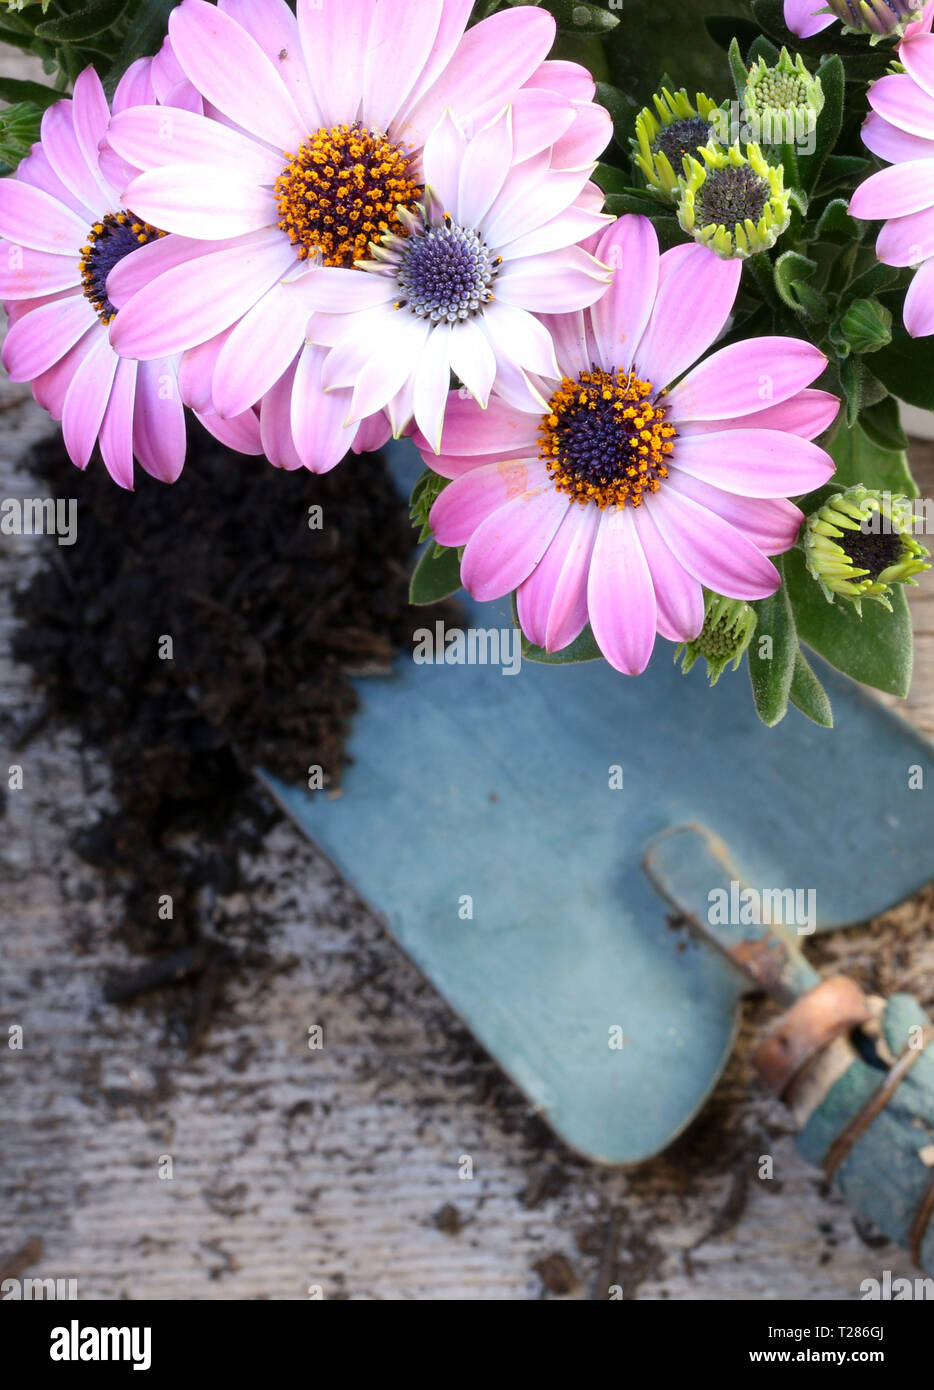 Top view of pink daisies and blue shovel on wooden background Stock Photo